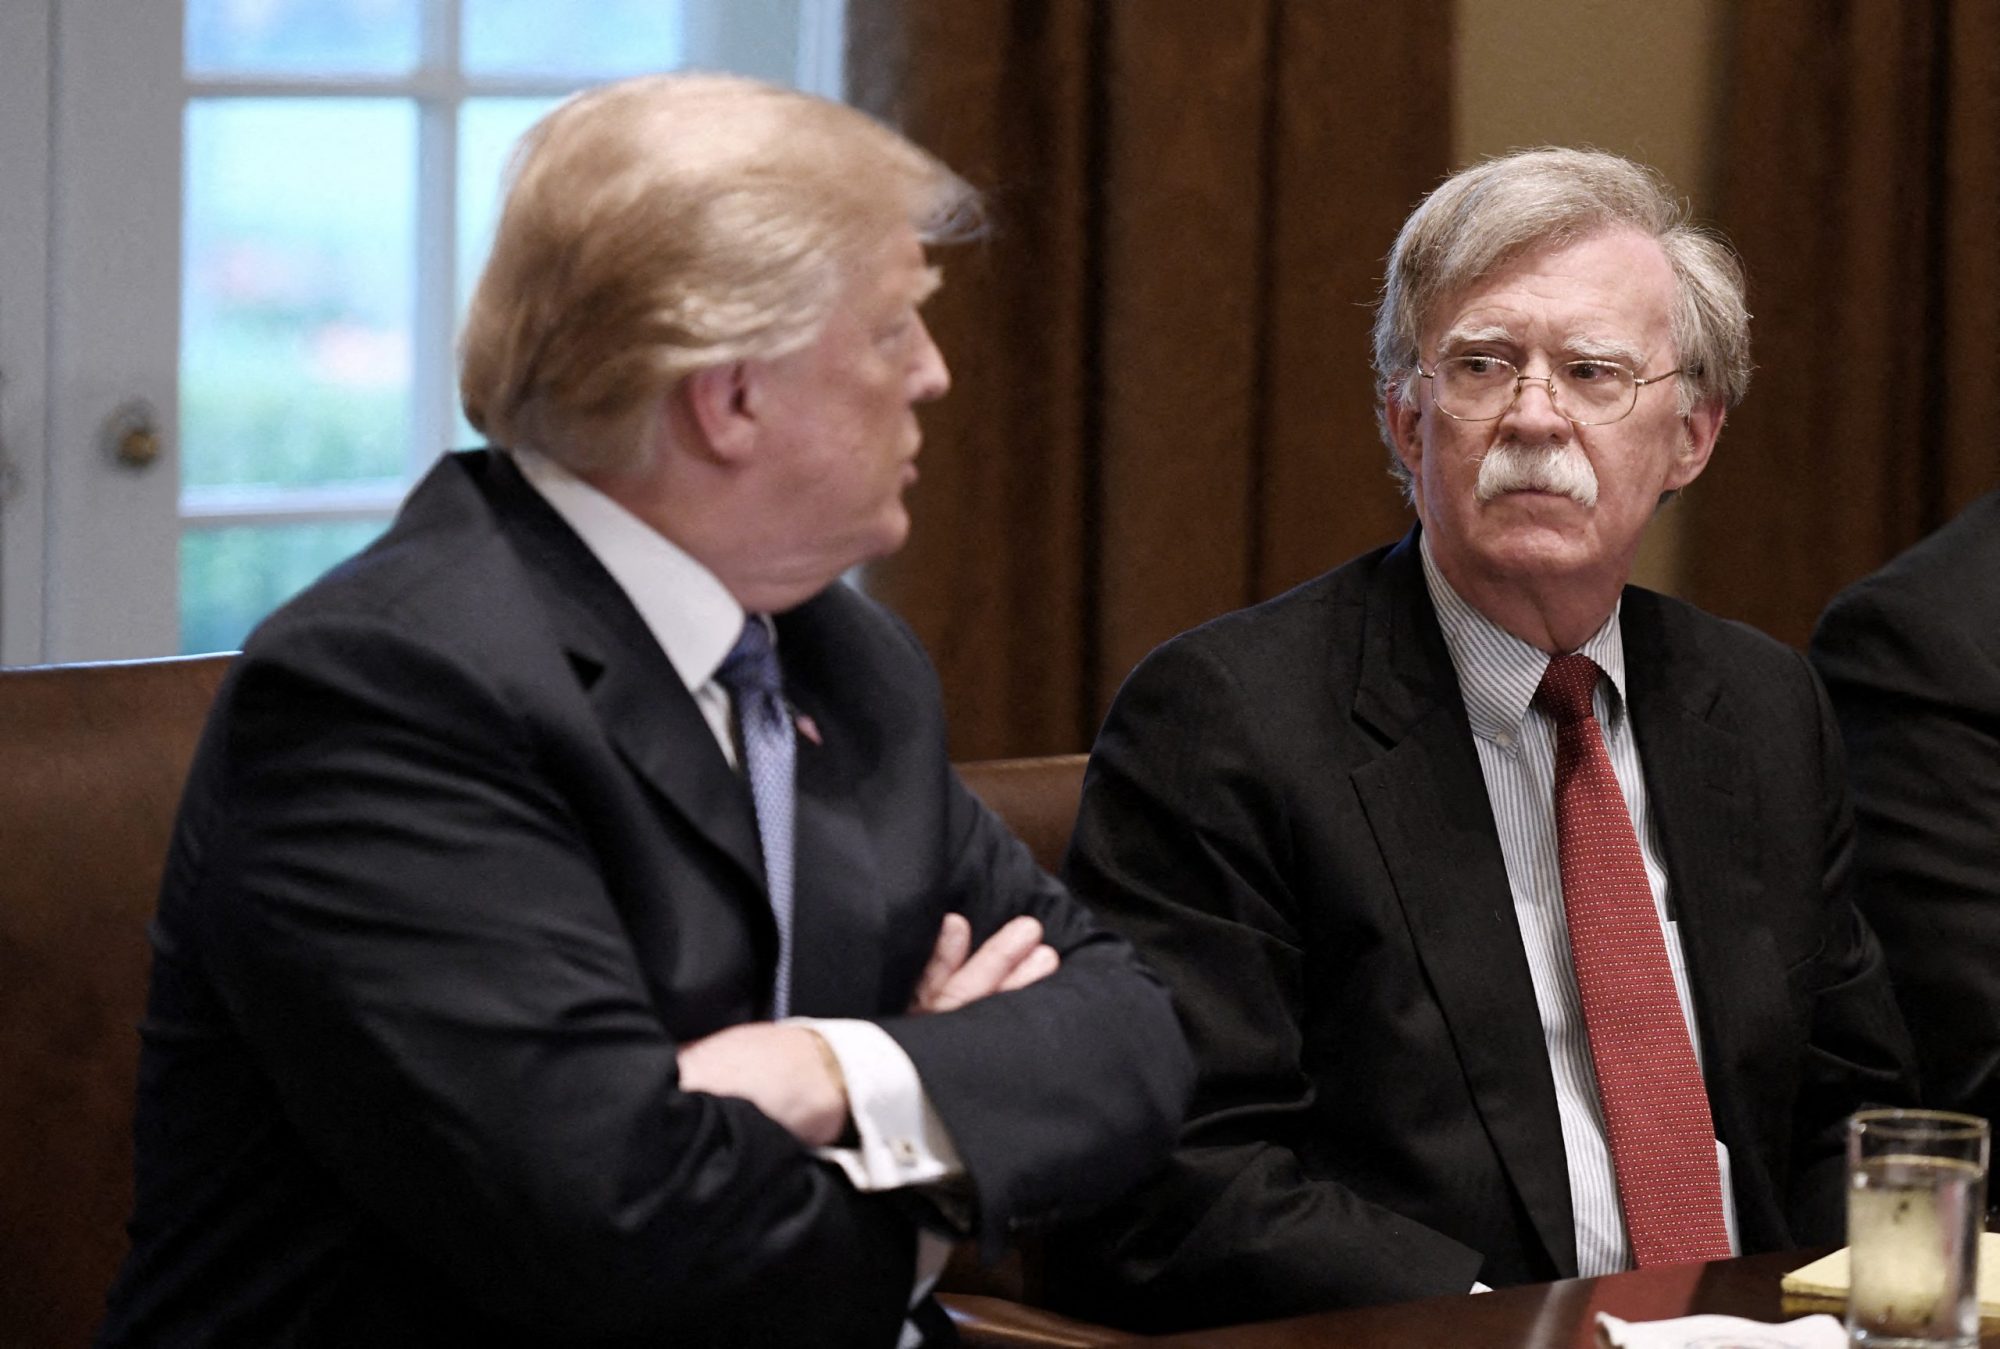 What John Bolton tells us about President Trump's Ukraine policy - Atlantic Council